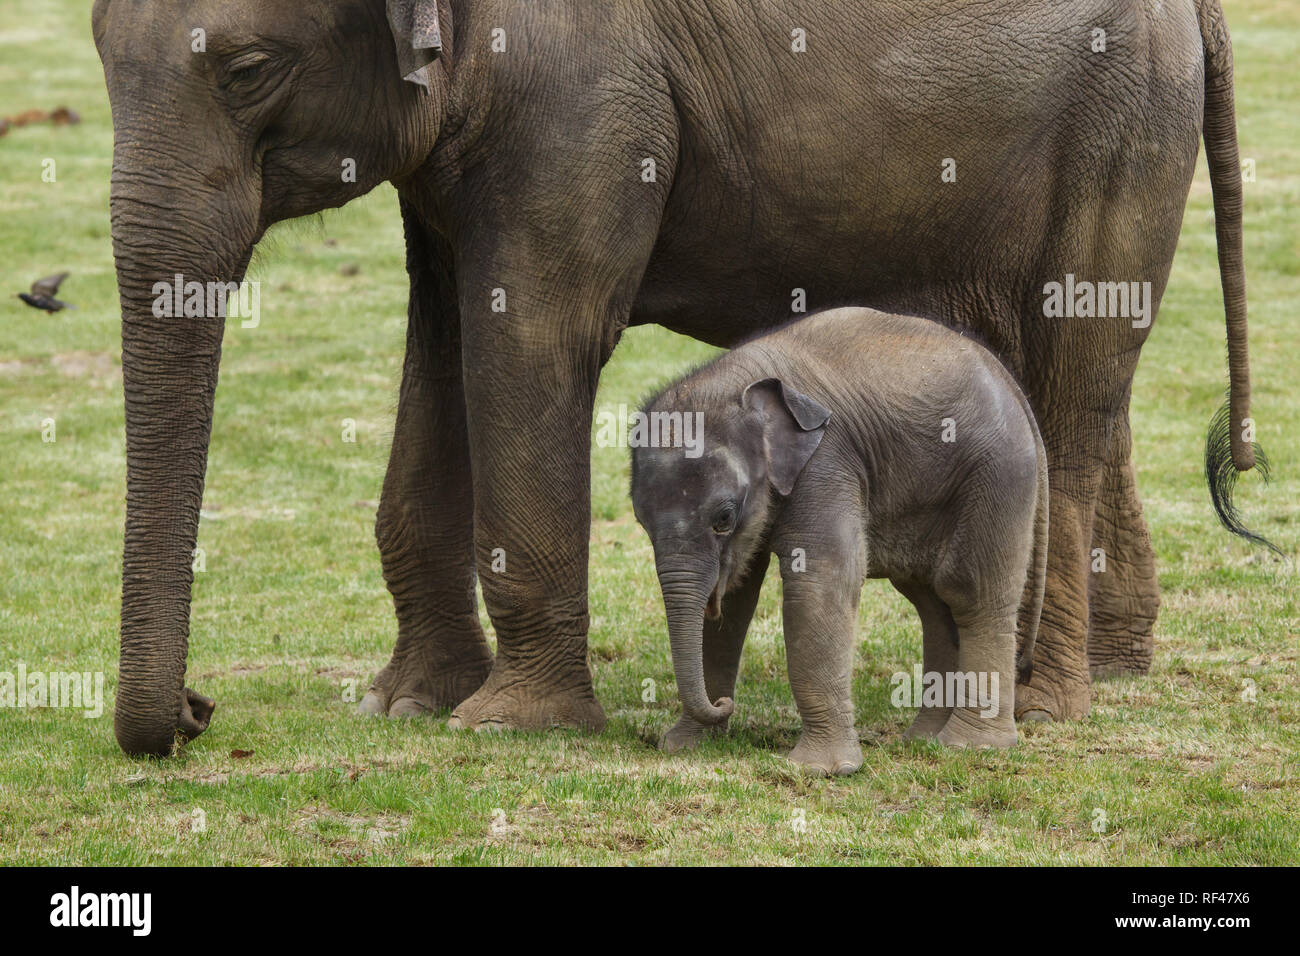 One-month-old Indian elephant (Elephas maximus indicus) named Maxmilian with his mother Janita at Prague Zoo, Czech Republic. The baby elephant was born on April 5, 2016, to the elephant female Janita as the first baby elephant not only born but also conceived at Prague Zoo. Stock Photo